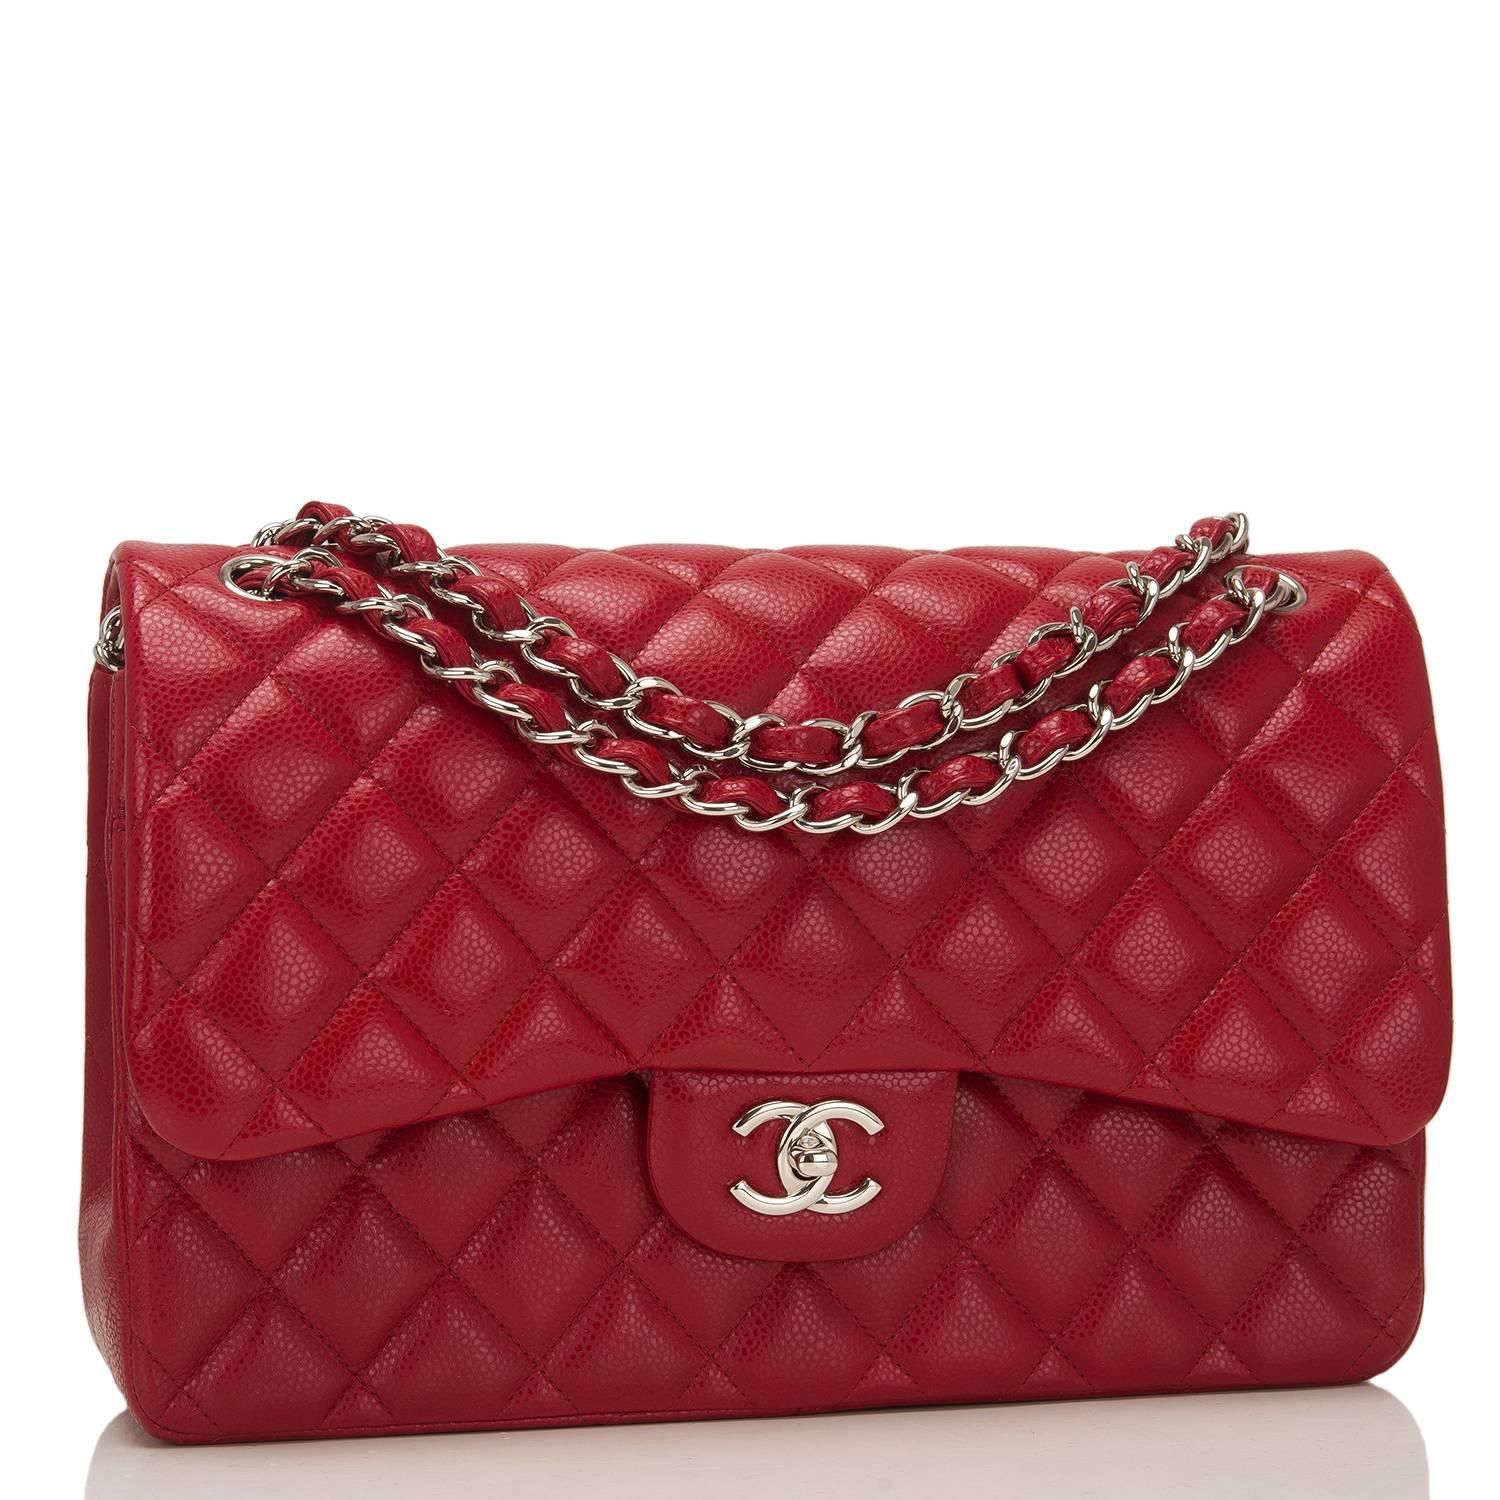 Chanel Jumbo Classic double flap bag of red caviar leather with silver tone hardware.

This bag features a front flap with signature CC turnlock closure, a half moon back pocket, and an adjustable interwoven silver tone chain link and dark red